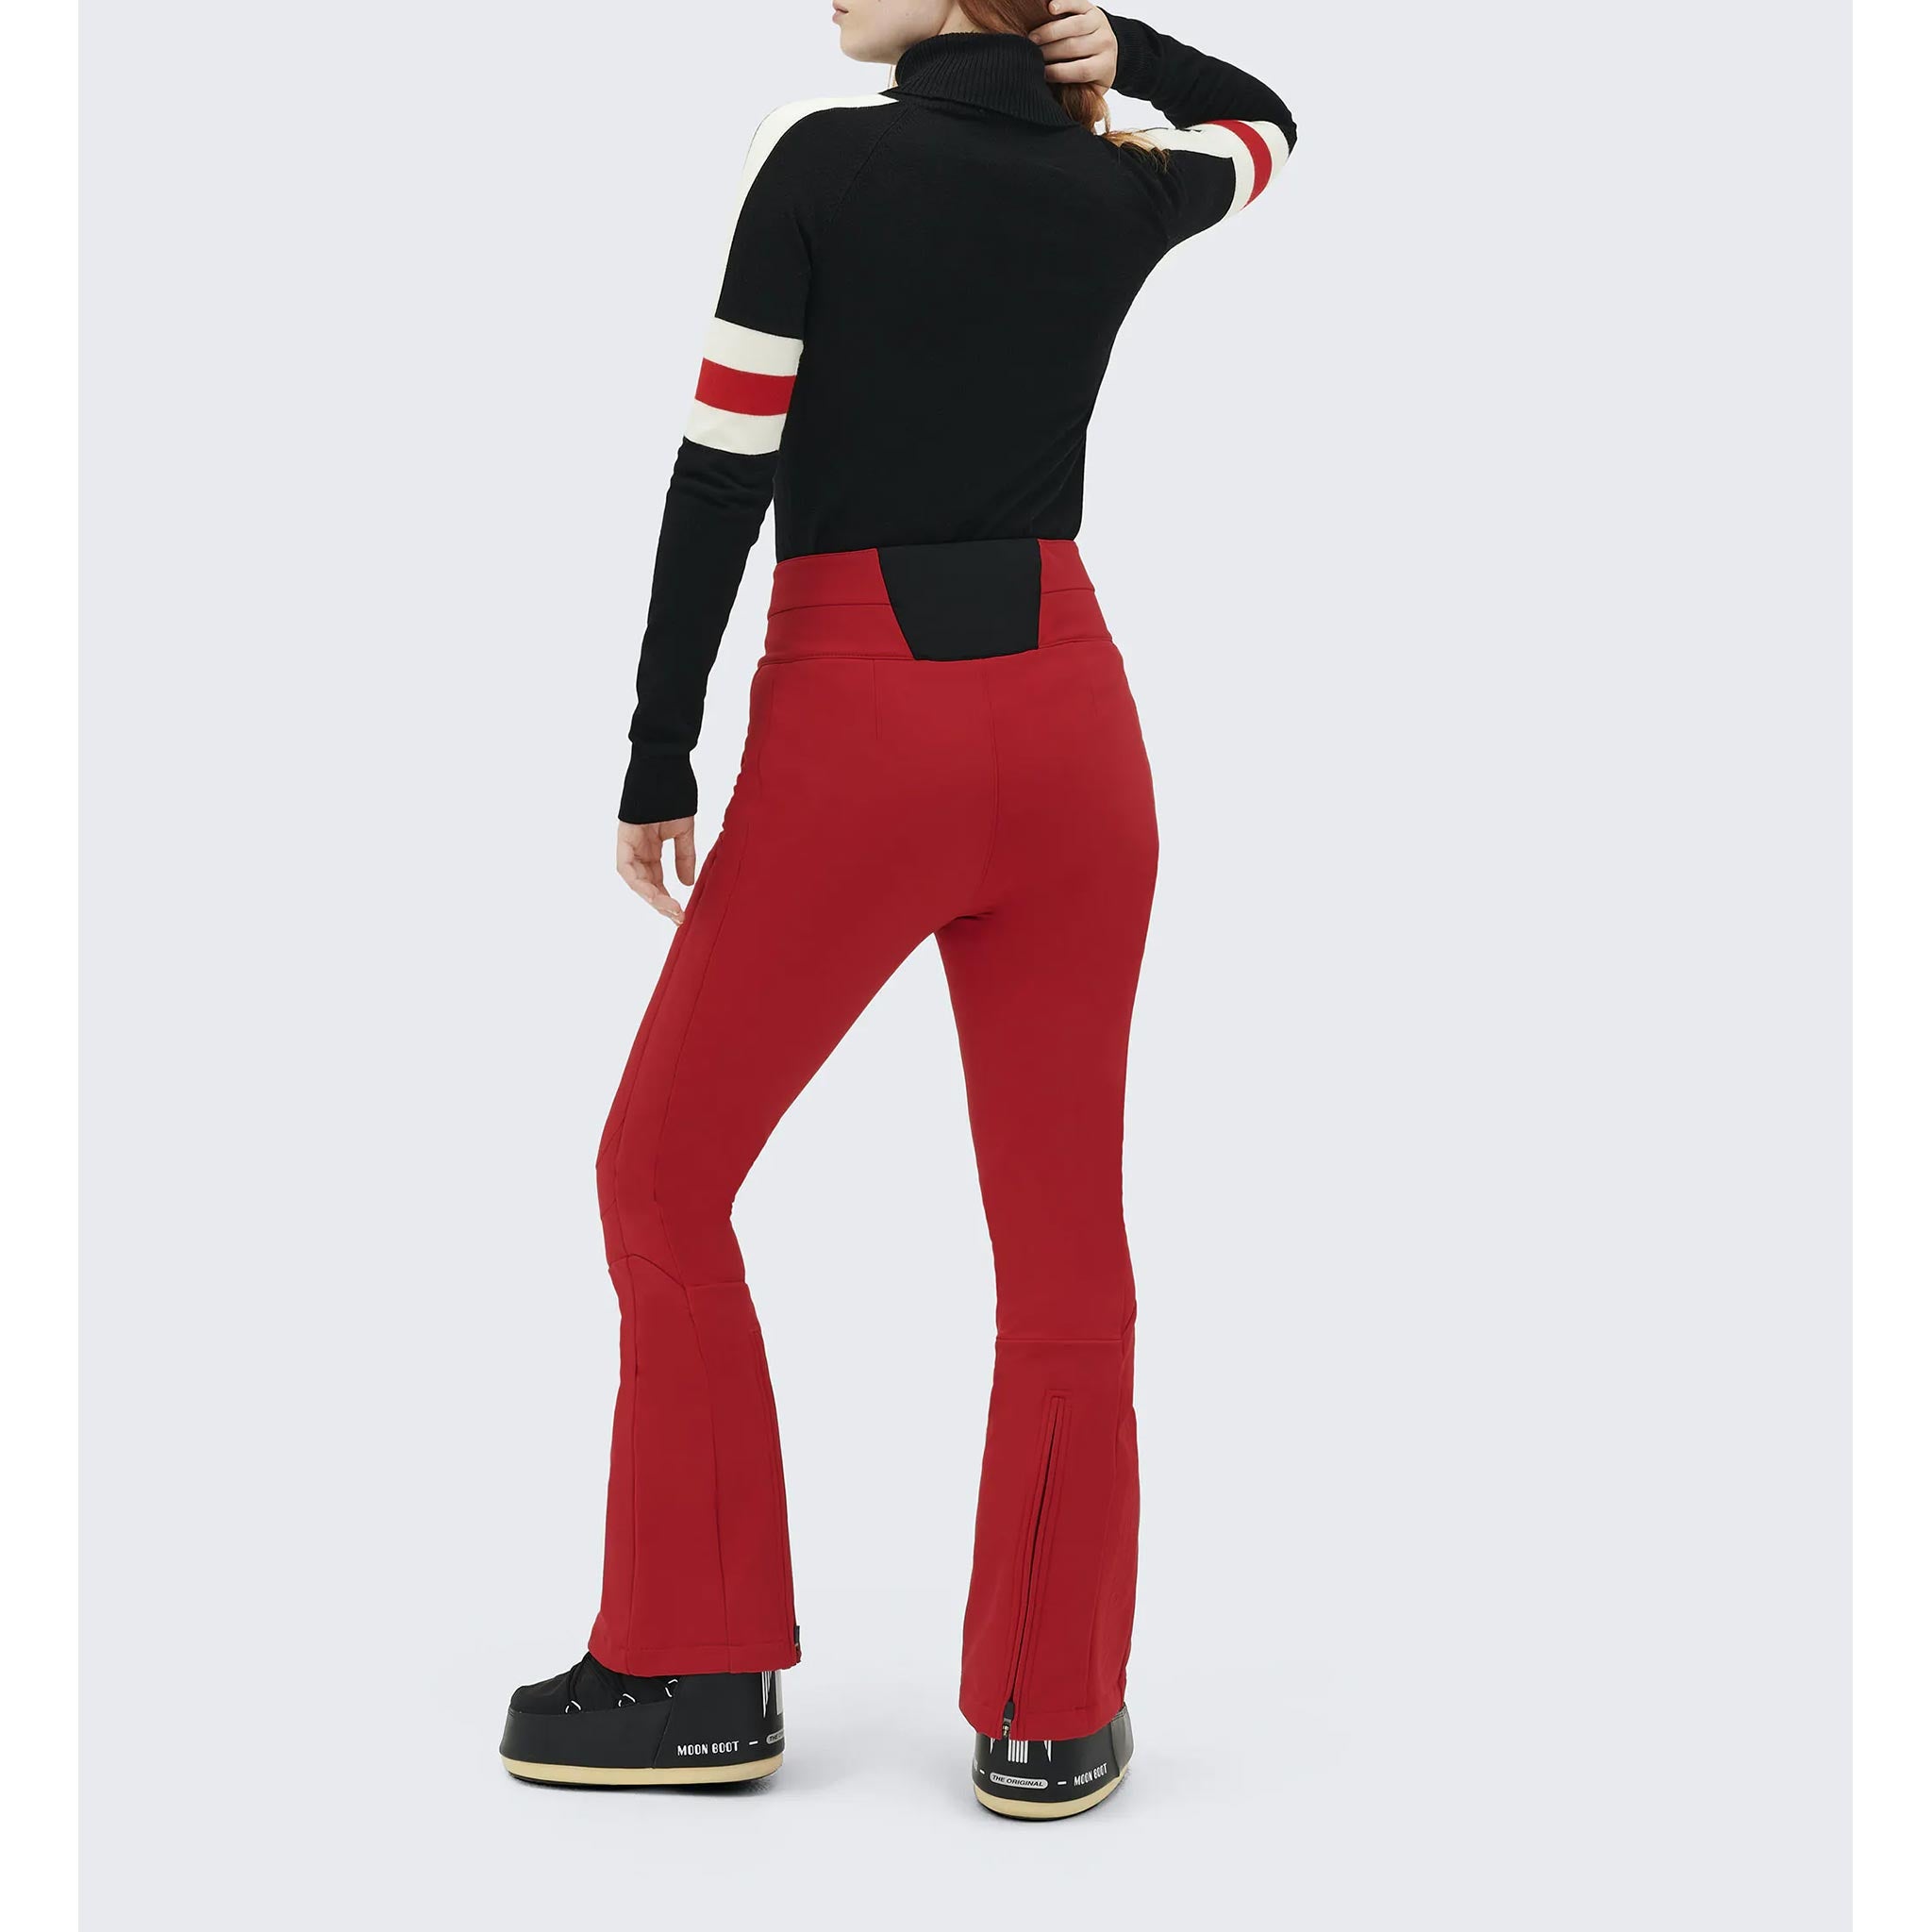 Aurora High Waist Flare Pant in Red